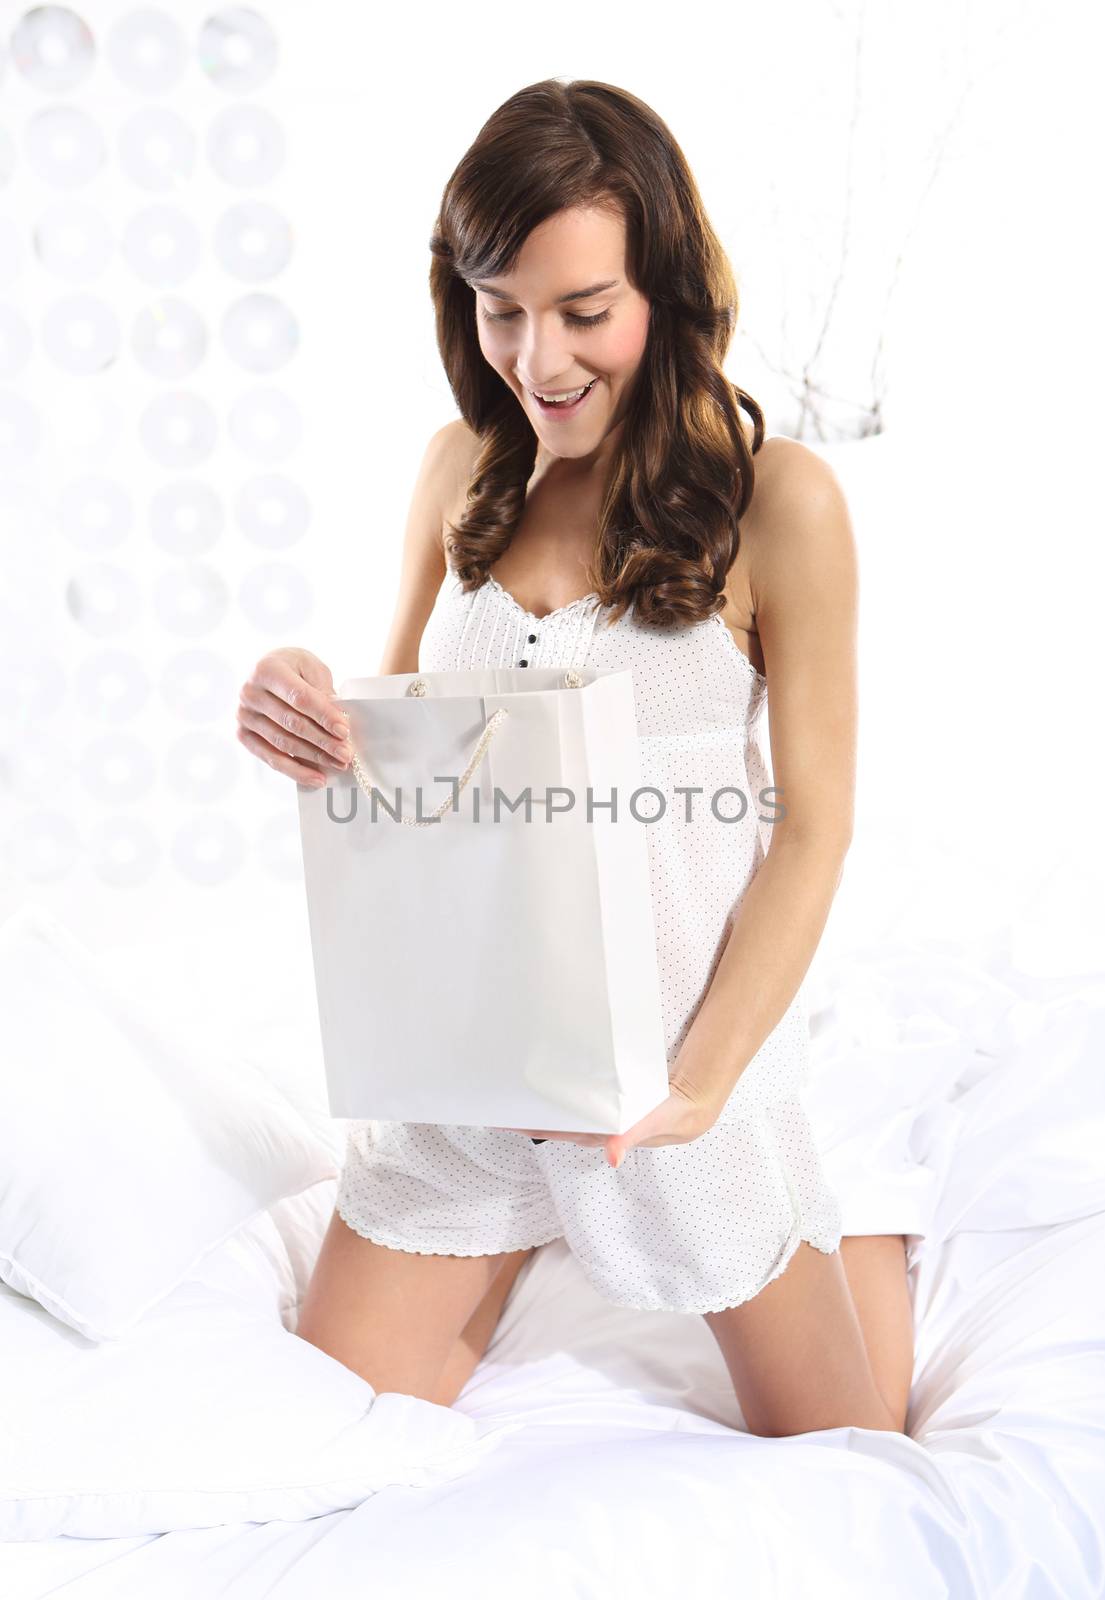 Beautiful young woman watching a watch gift kneeling on the bed